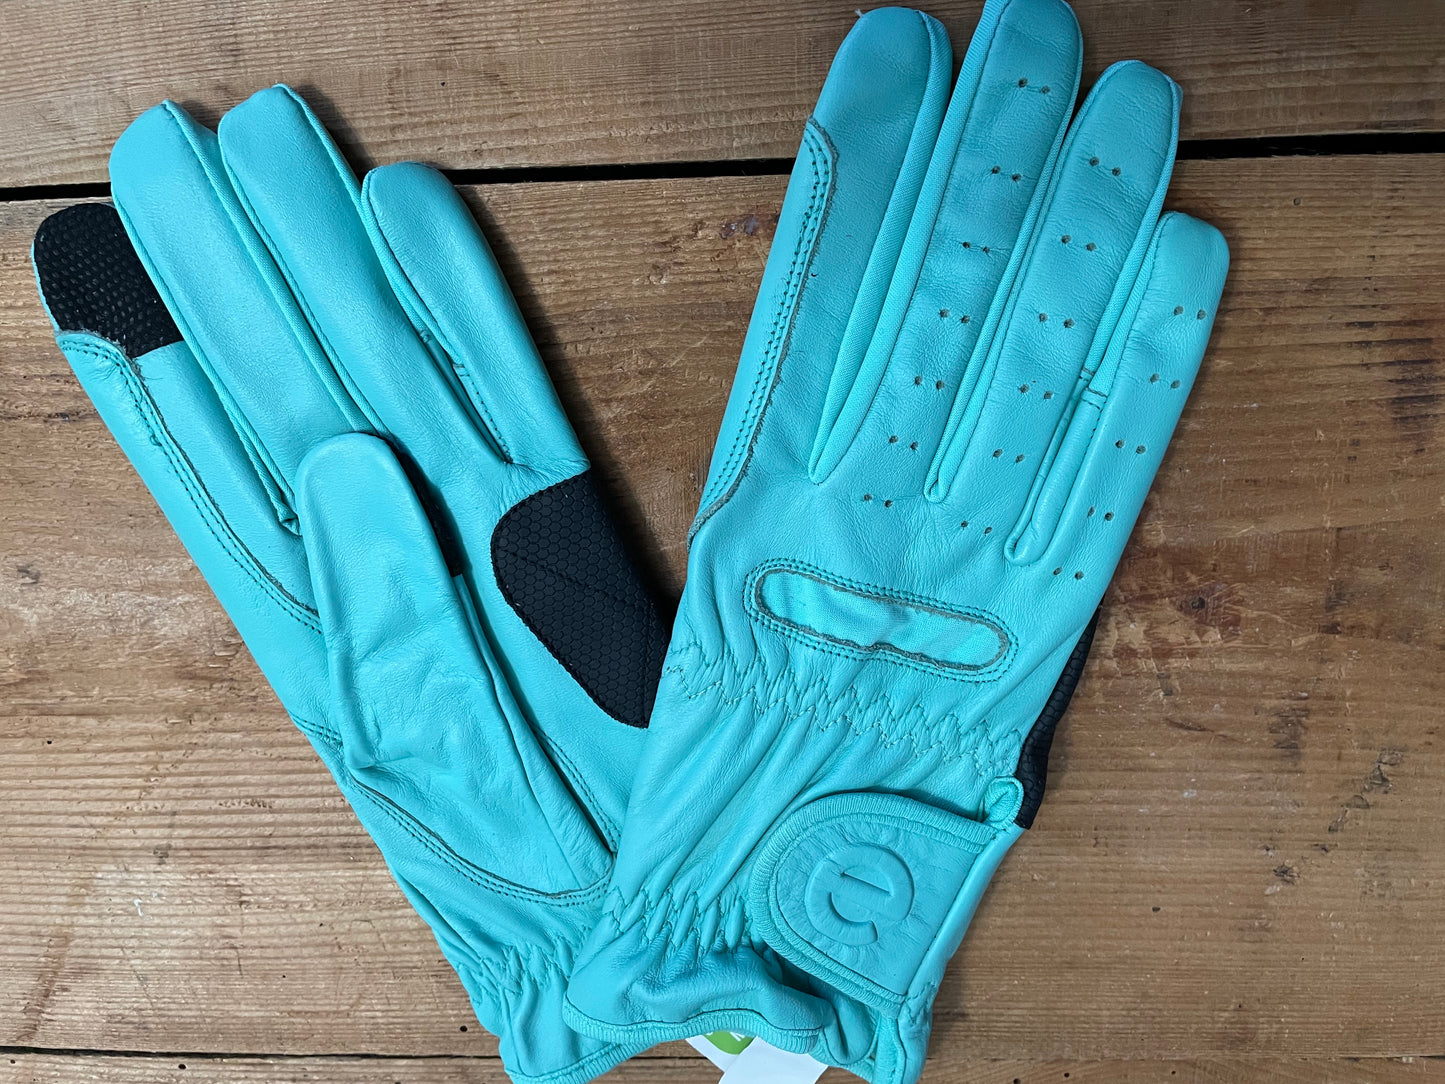 Gloves - eQuest Grip Pro Leather - Teal